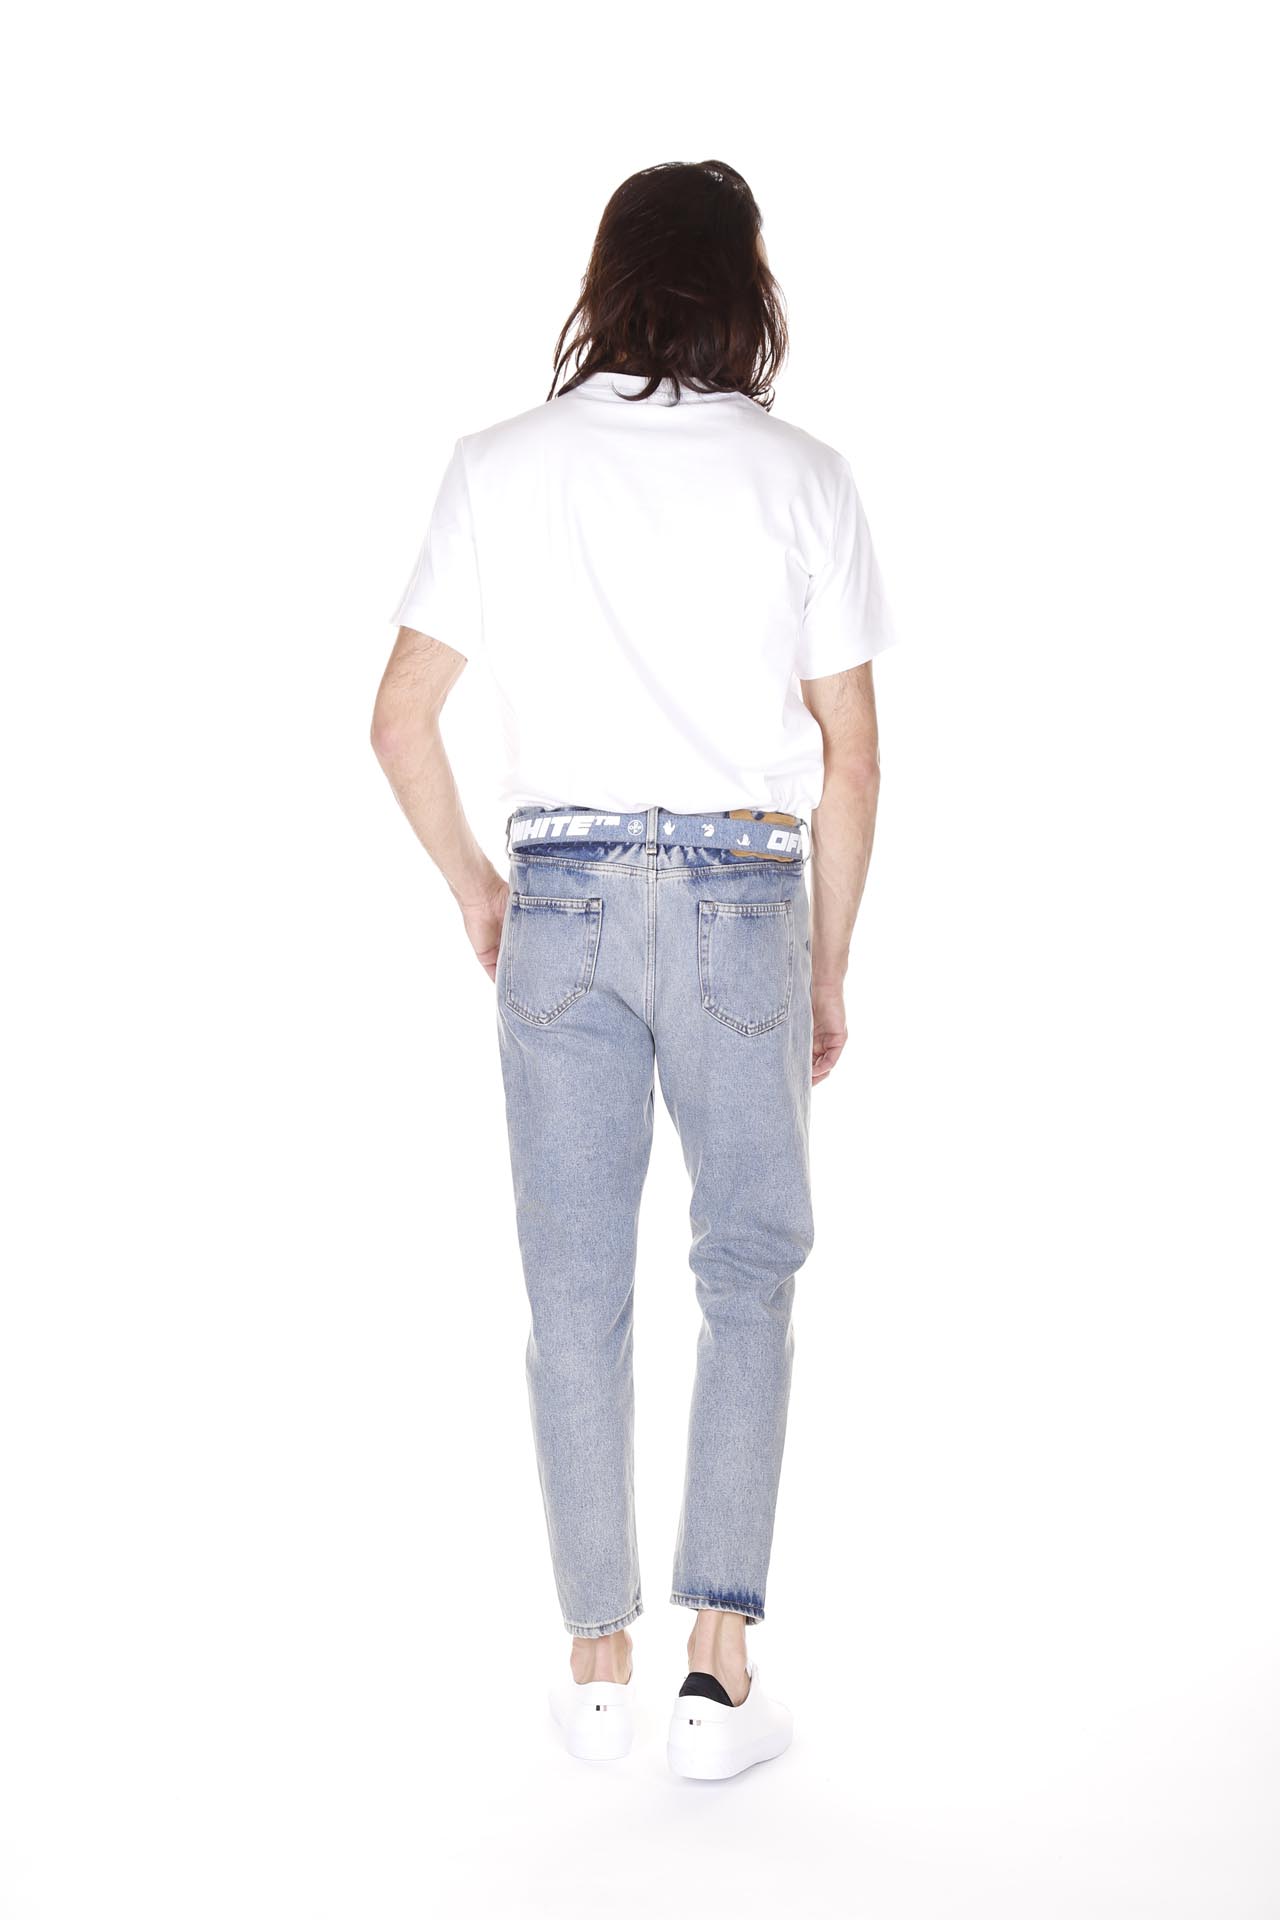 Off White, Jeans